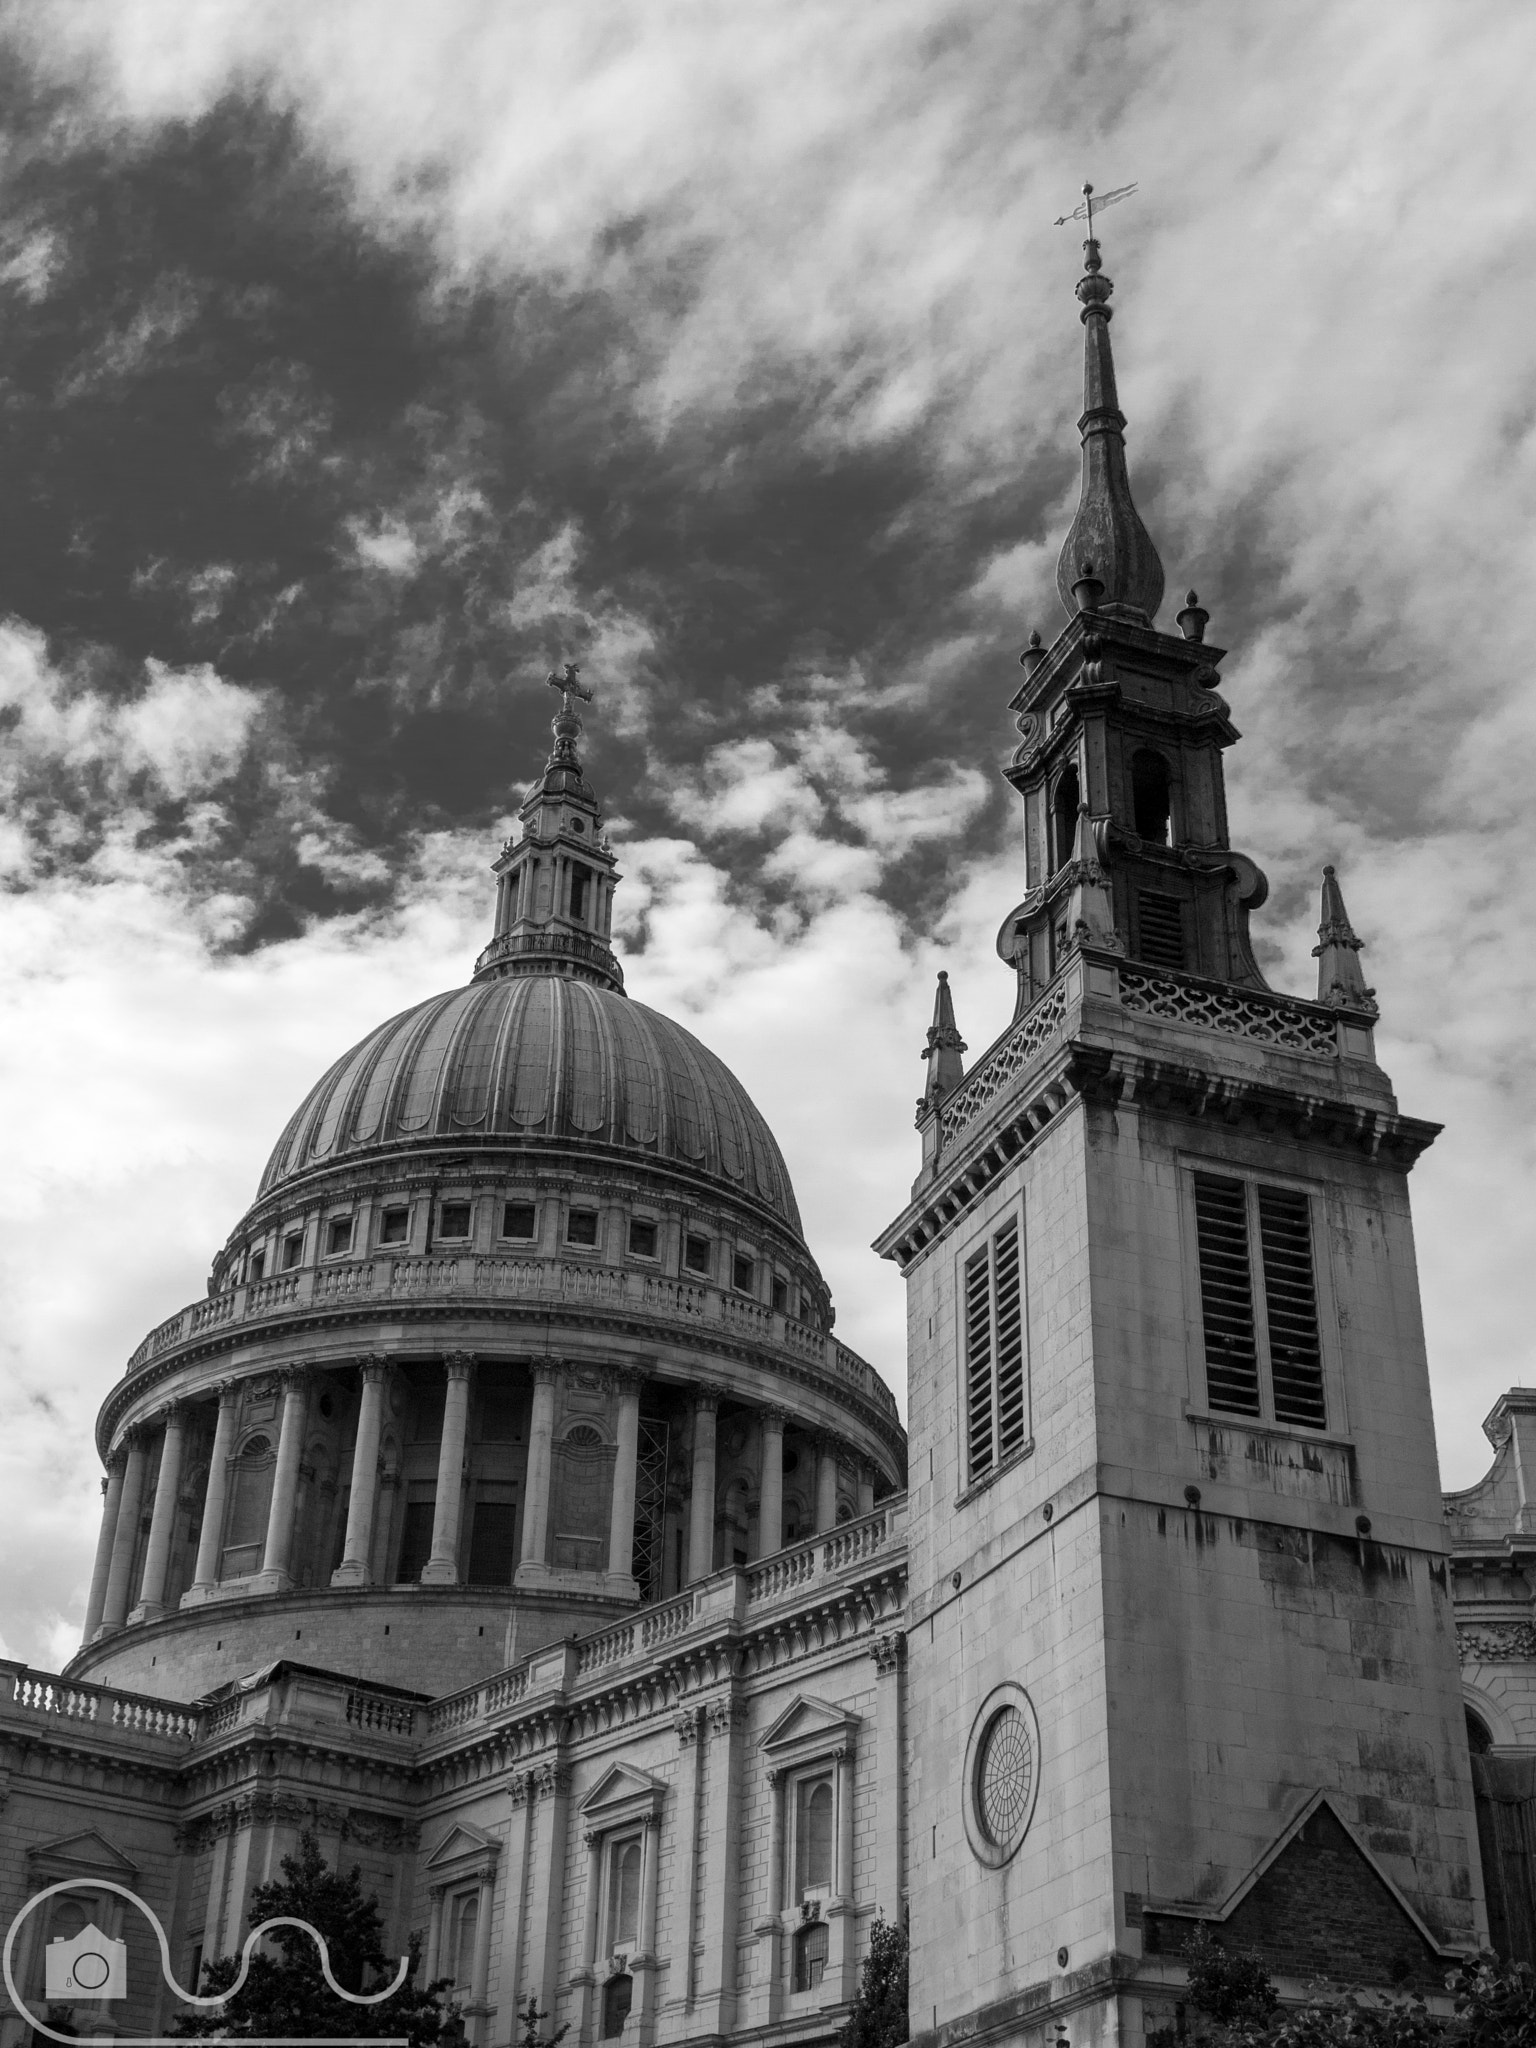 Olympus PEN E-PL3 sample photo. At st paul's (back) photography